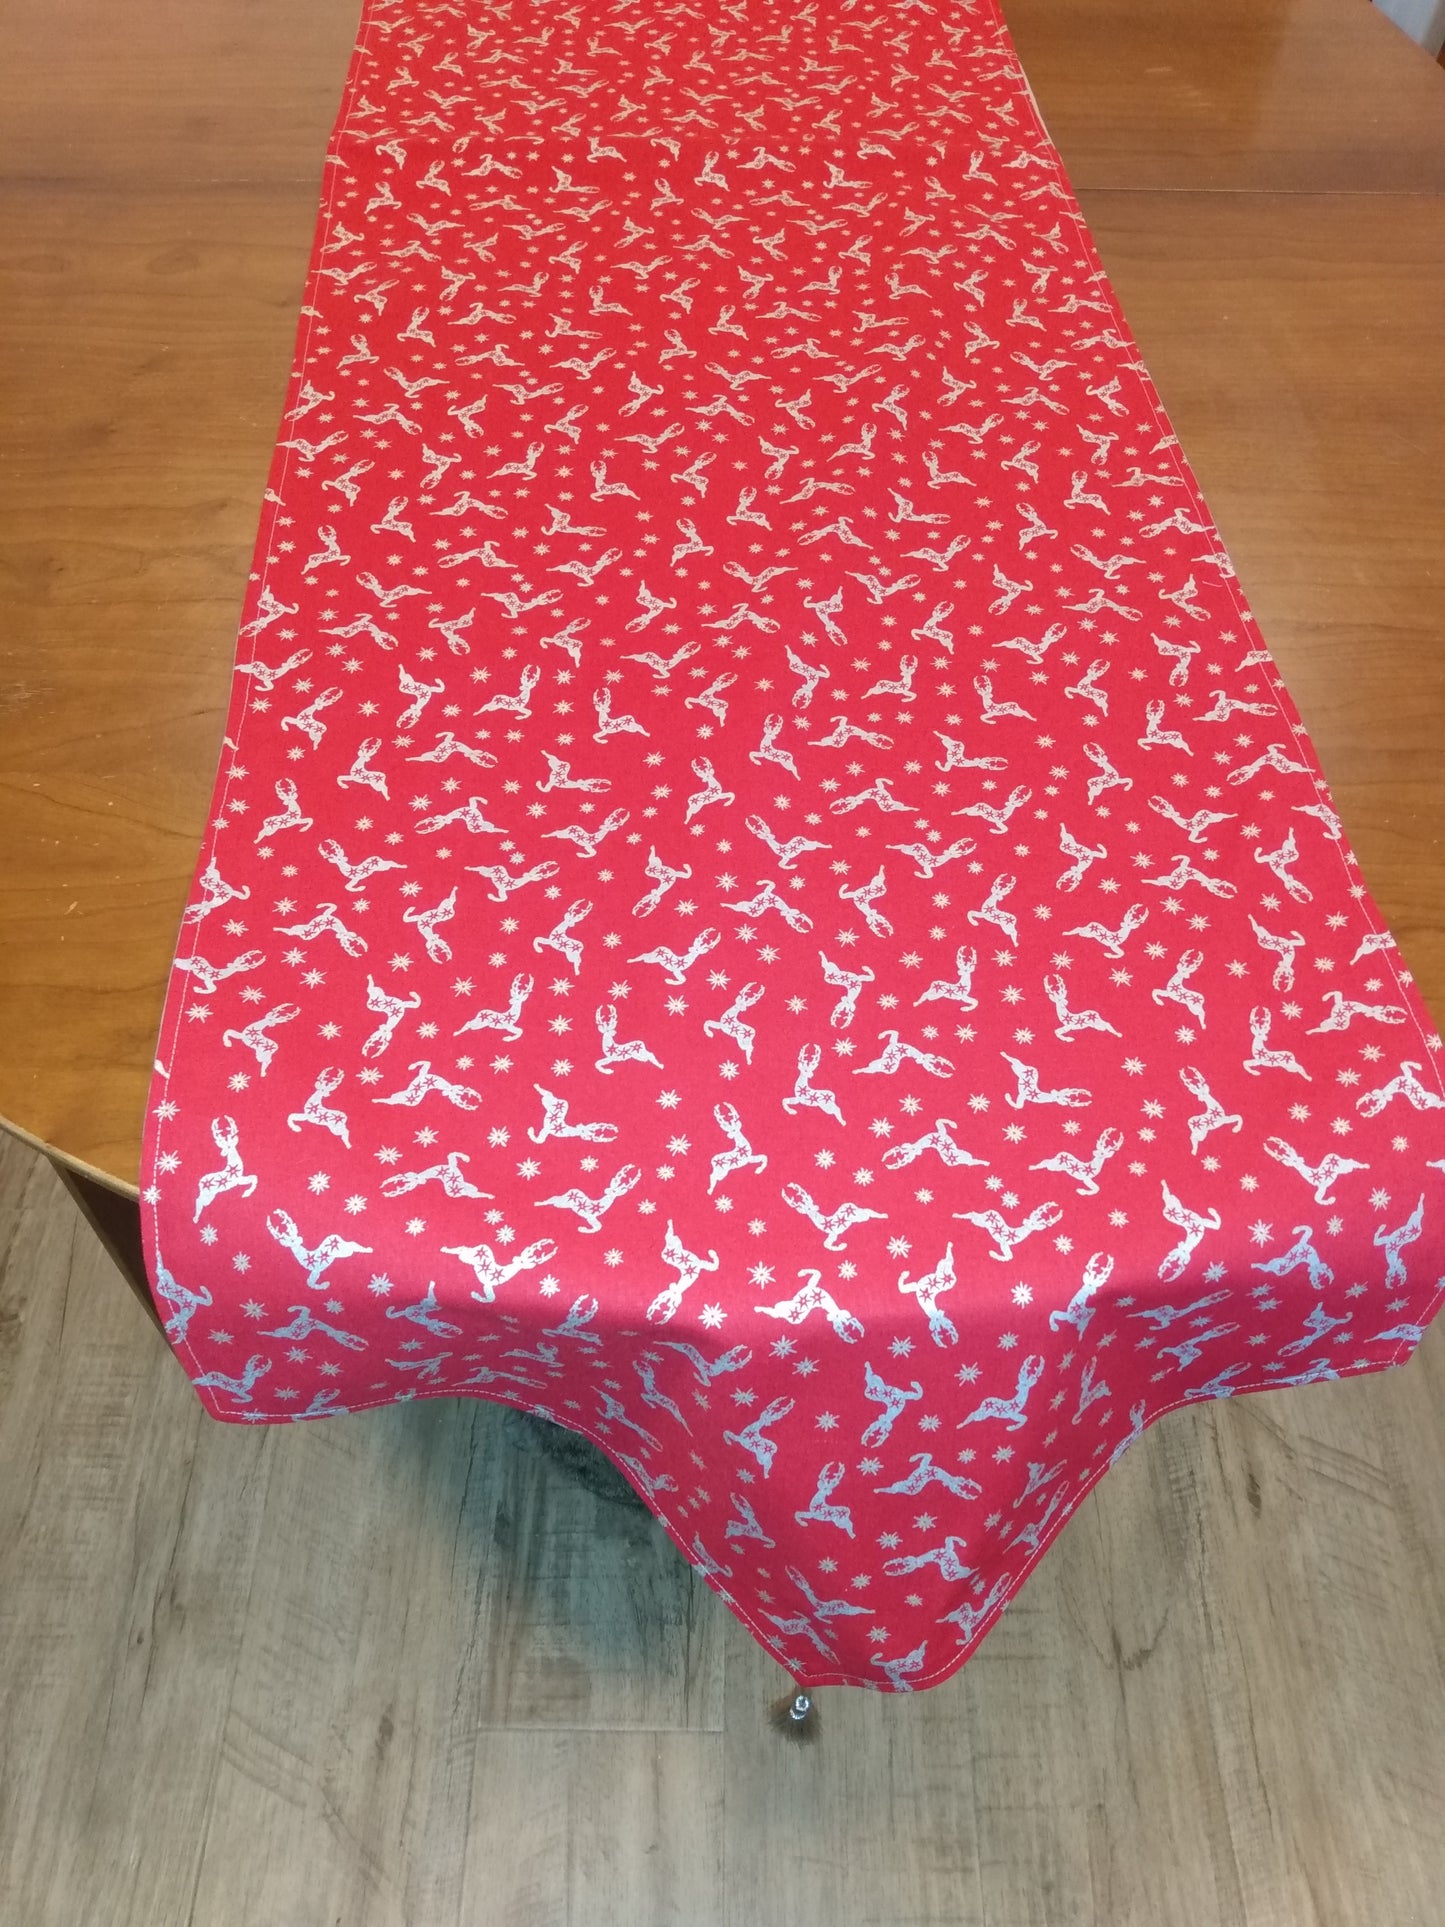 Table Runner 100% Cotton Silver Reindeer Stars Red